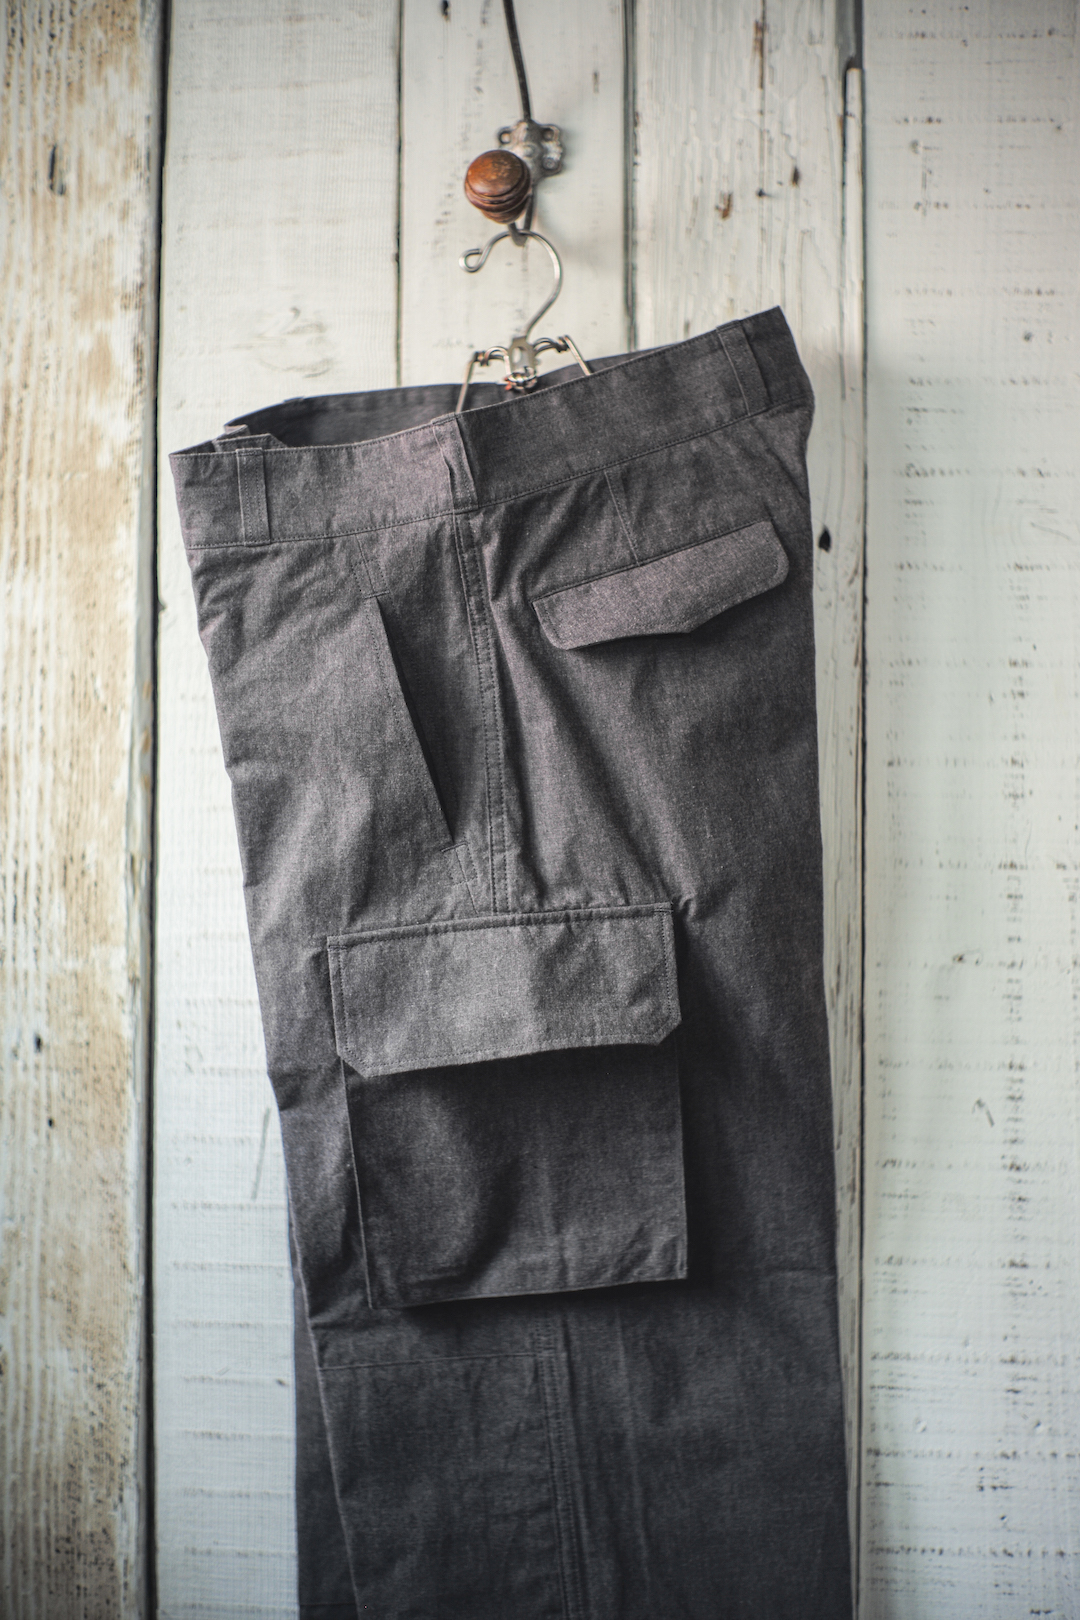 1940 French Army Trousers